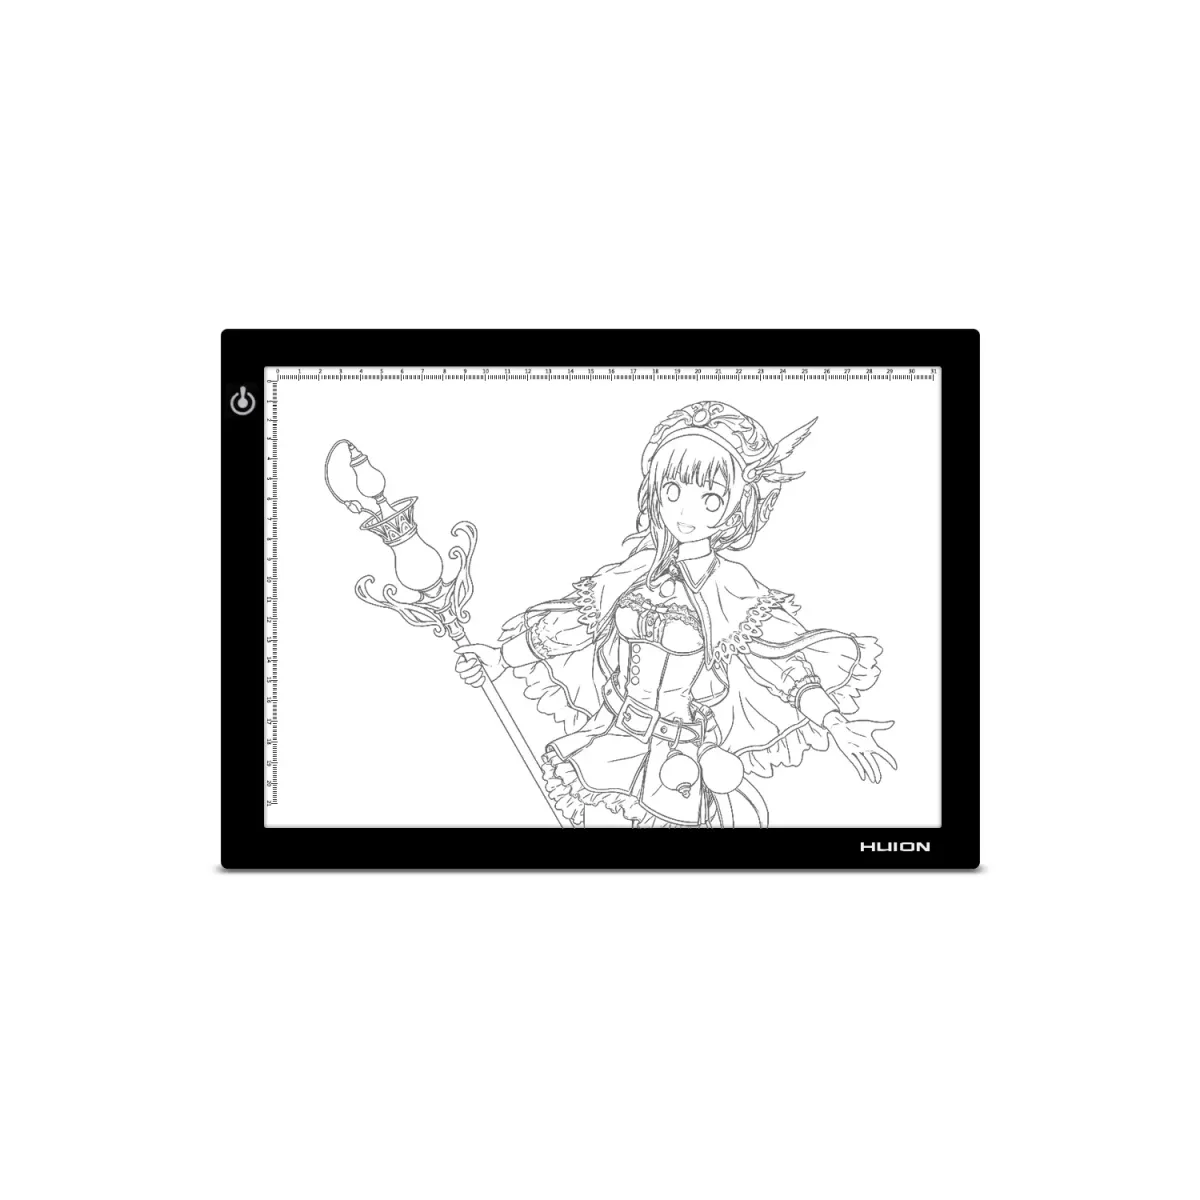 Manga Sketch Pad: Personalized Sketch Pad for Drawing with Manga